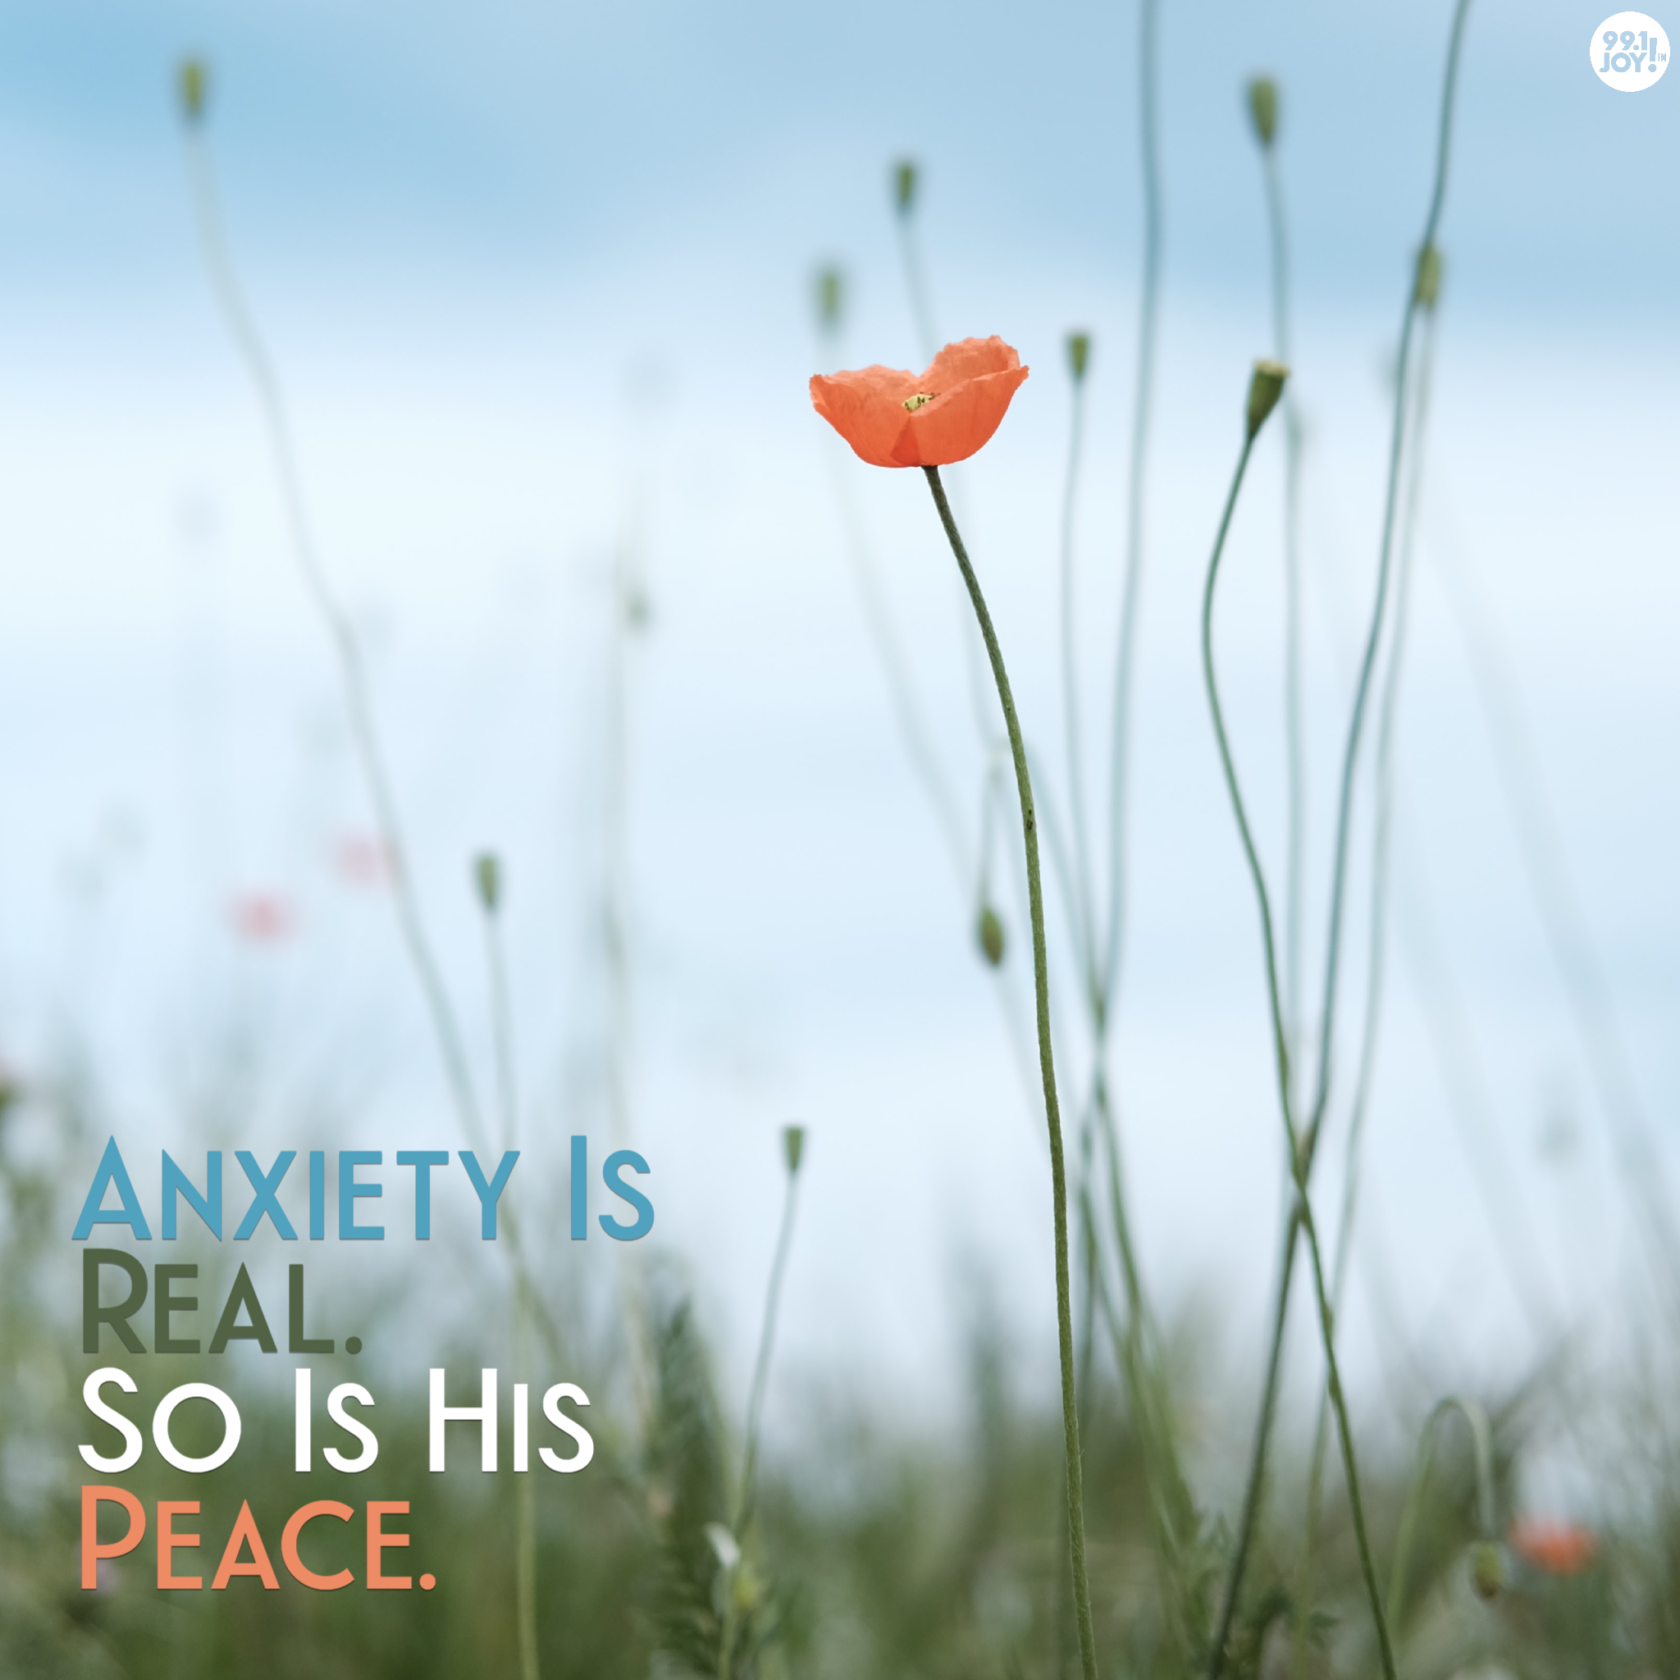 Anxiety Is Real. So Is His Peace.